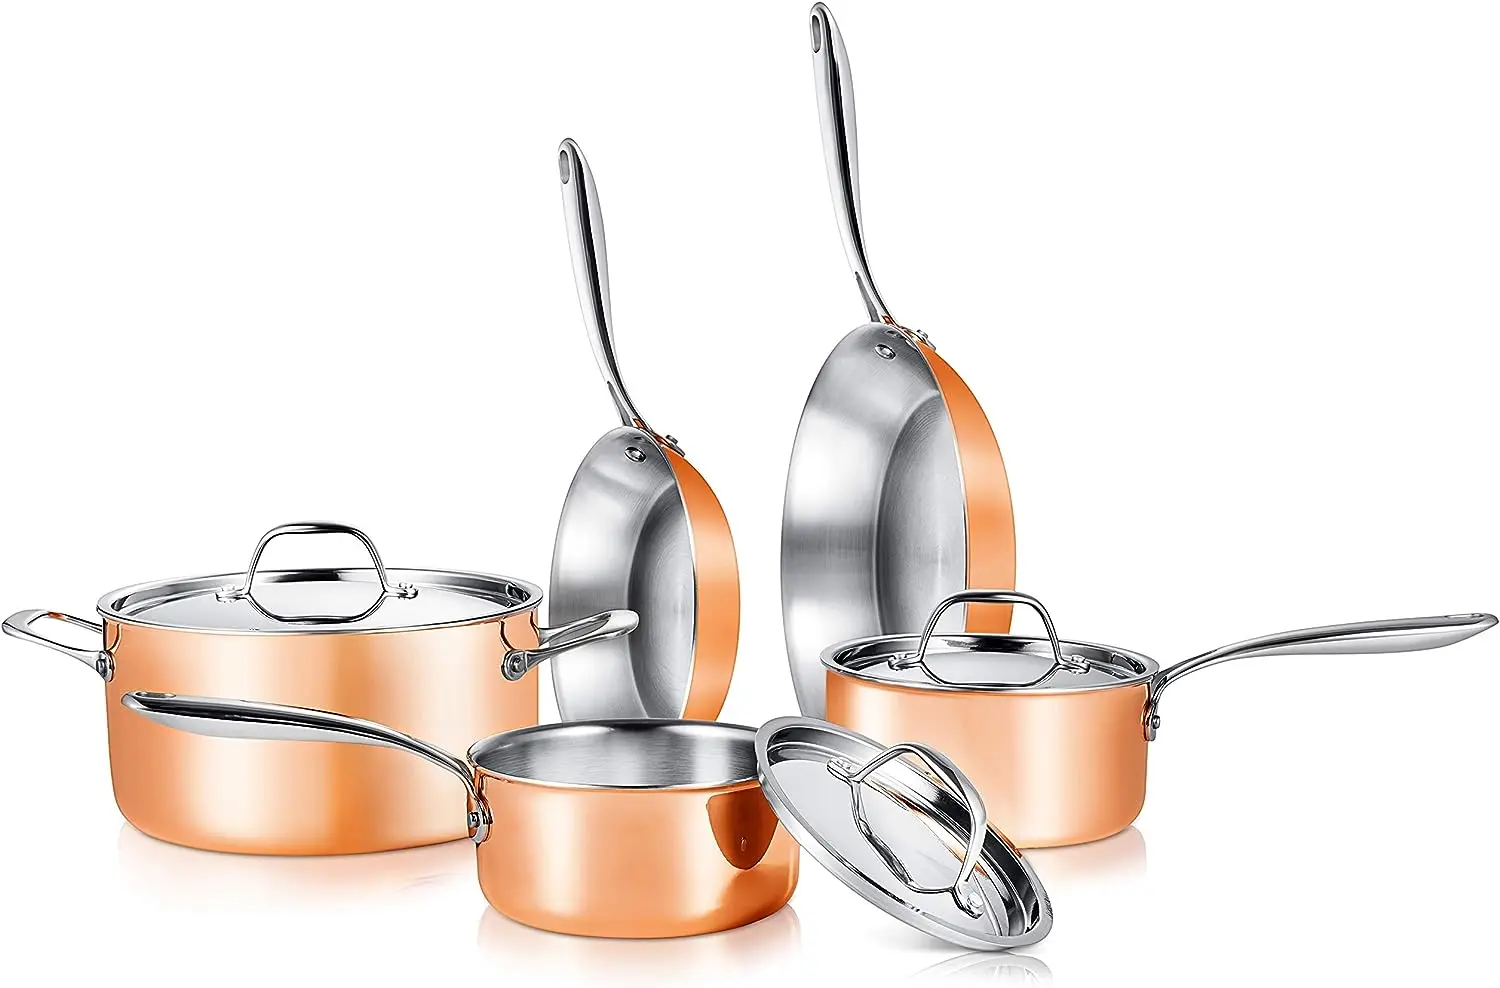 

Pcs. Stainless Steel Kitchenware Pots & Pans Set Stylish Kitchen Cookware w/Cast SS Handle, Tri-Ply Authentic Copper, for Sa Sta